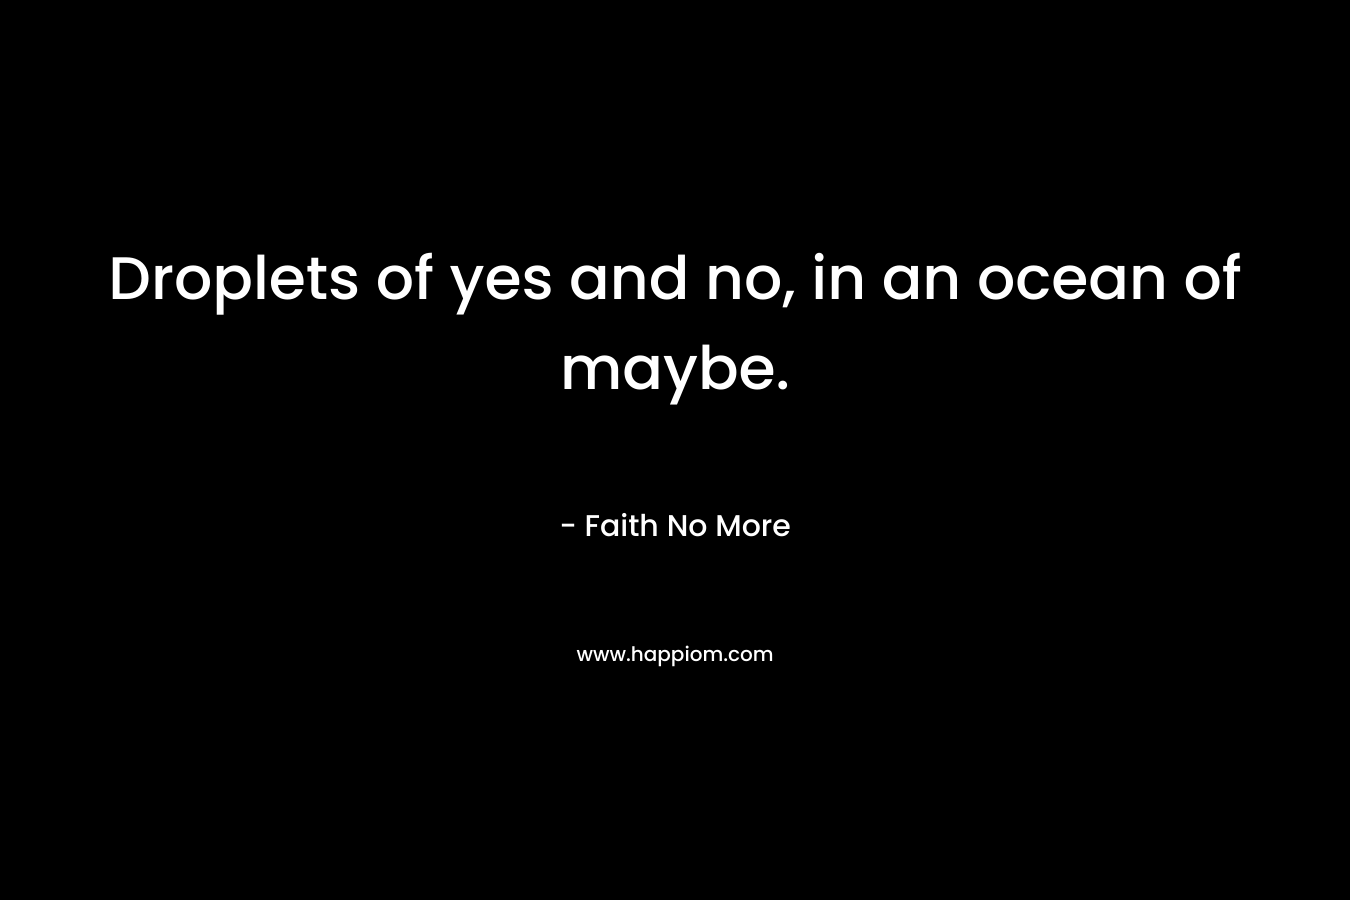 Droplets of yes and no, in an ocean of maybe.